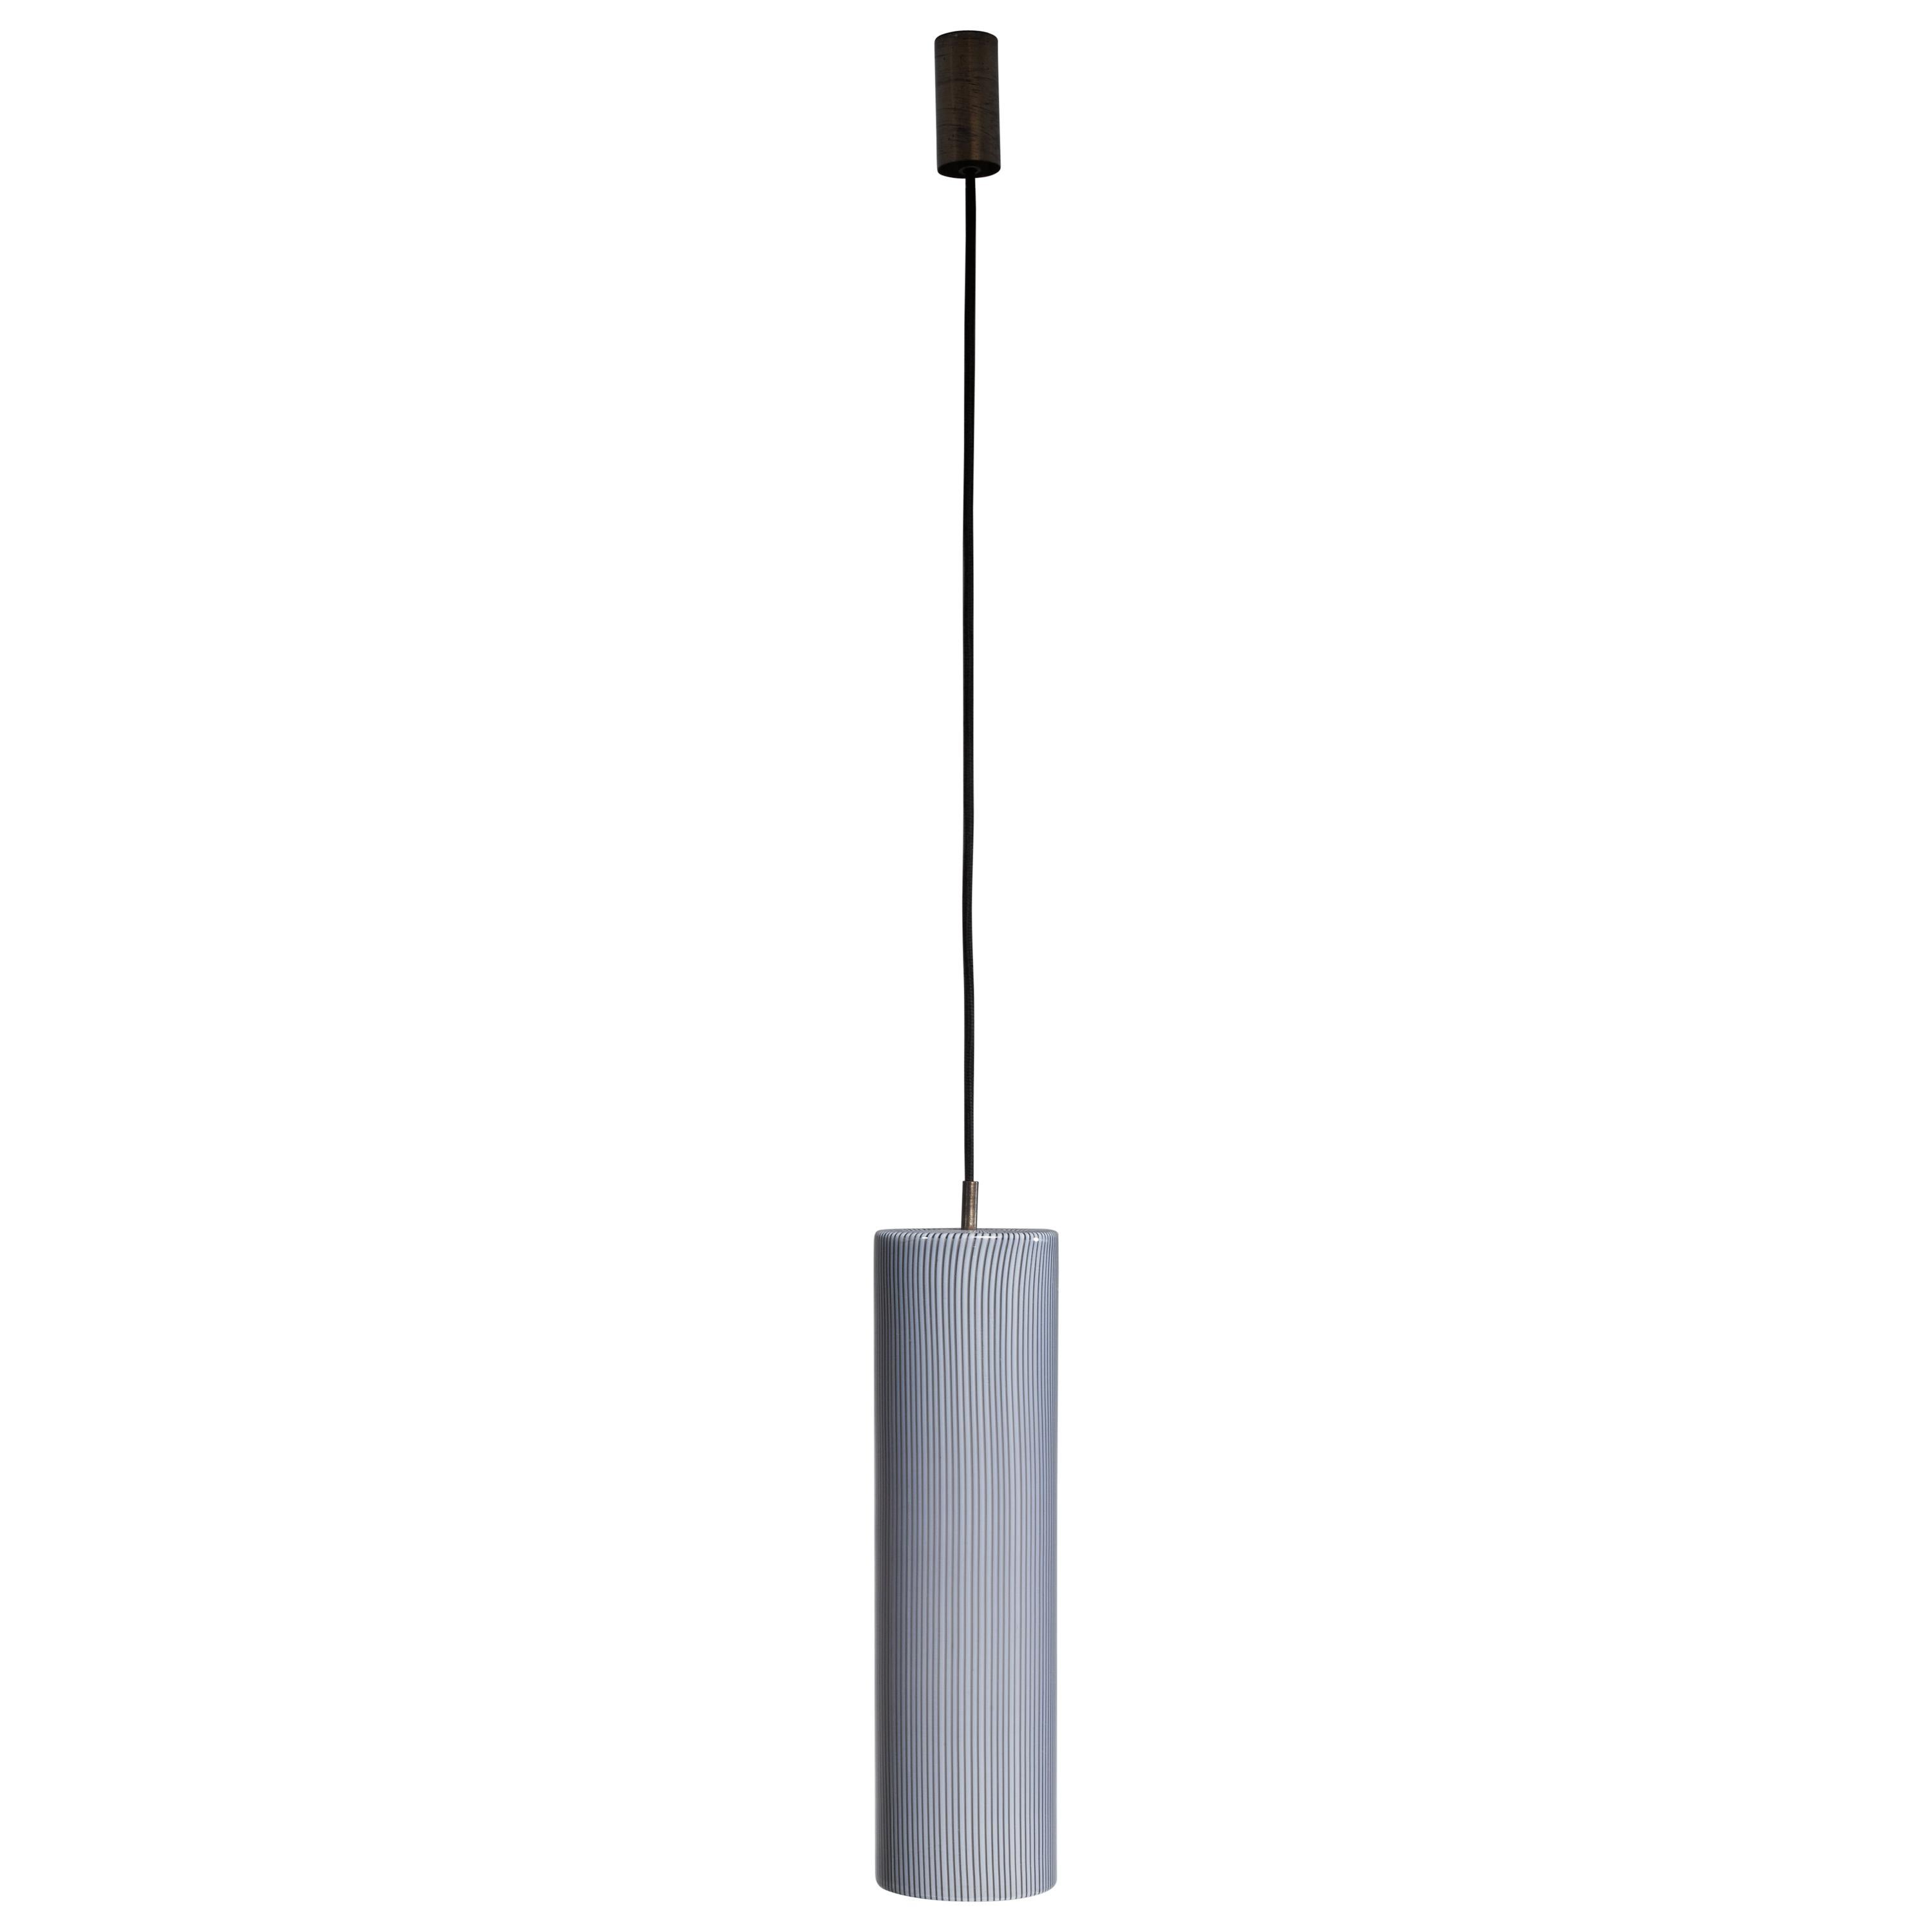 A large cylindrical glass pendant by Massimo Vignelli with thin black stripes by Vistosi, Italy. It is made with cased glass with a brass mounting. In excellent condition. The total drop can be adjusted to your requirements.